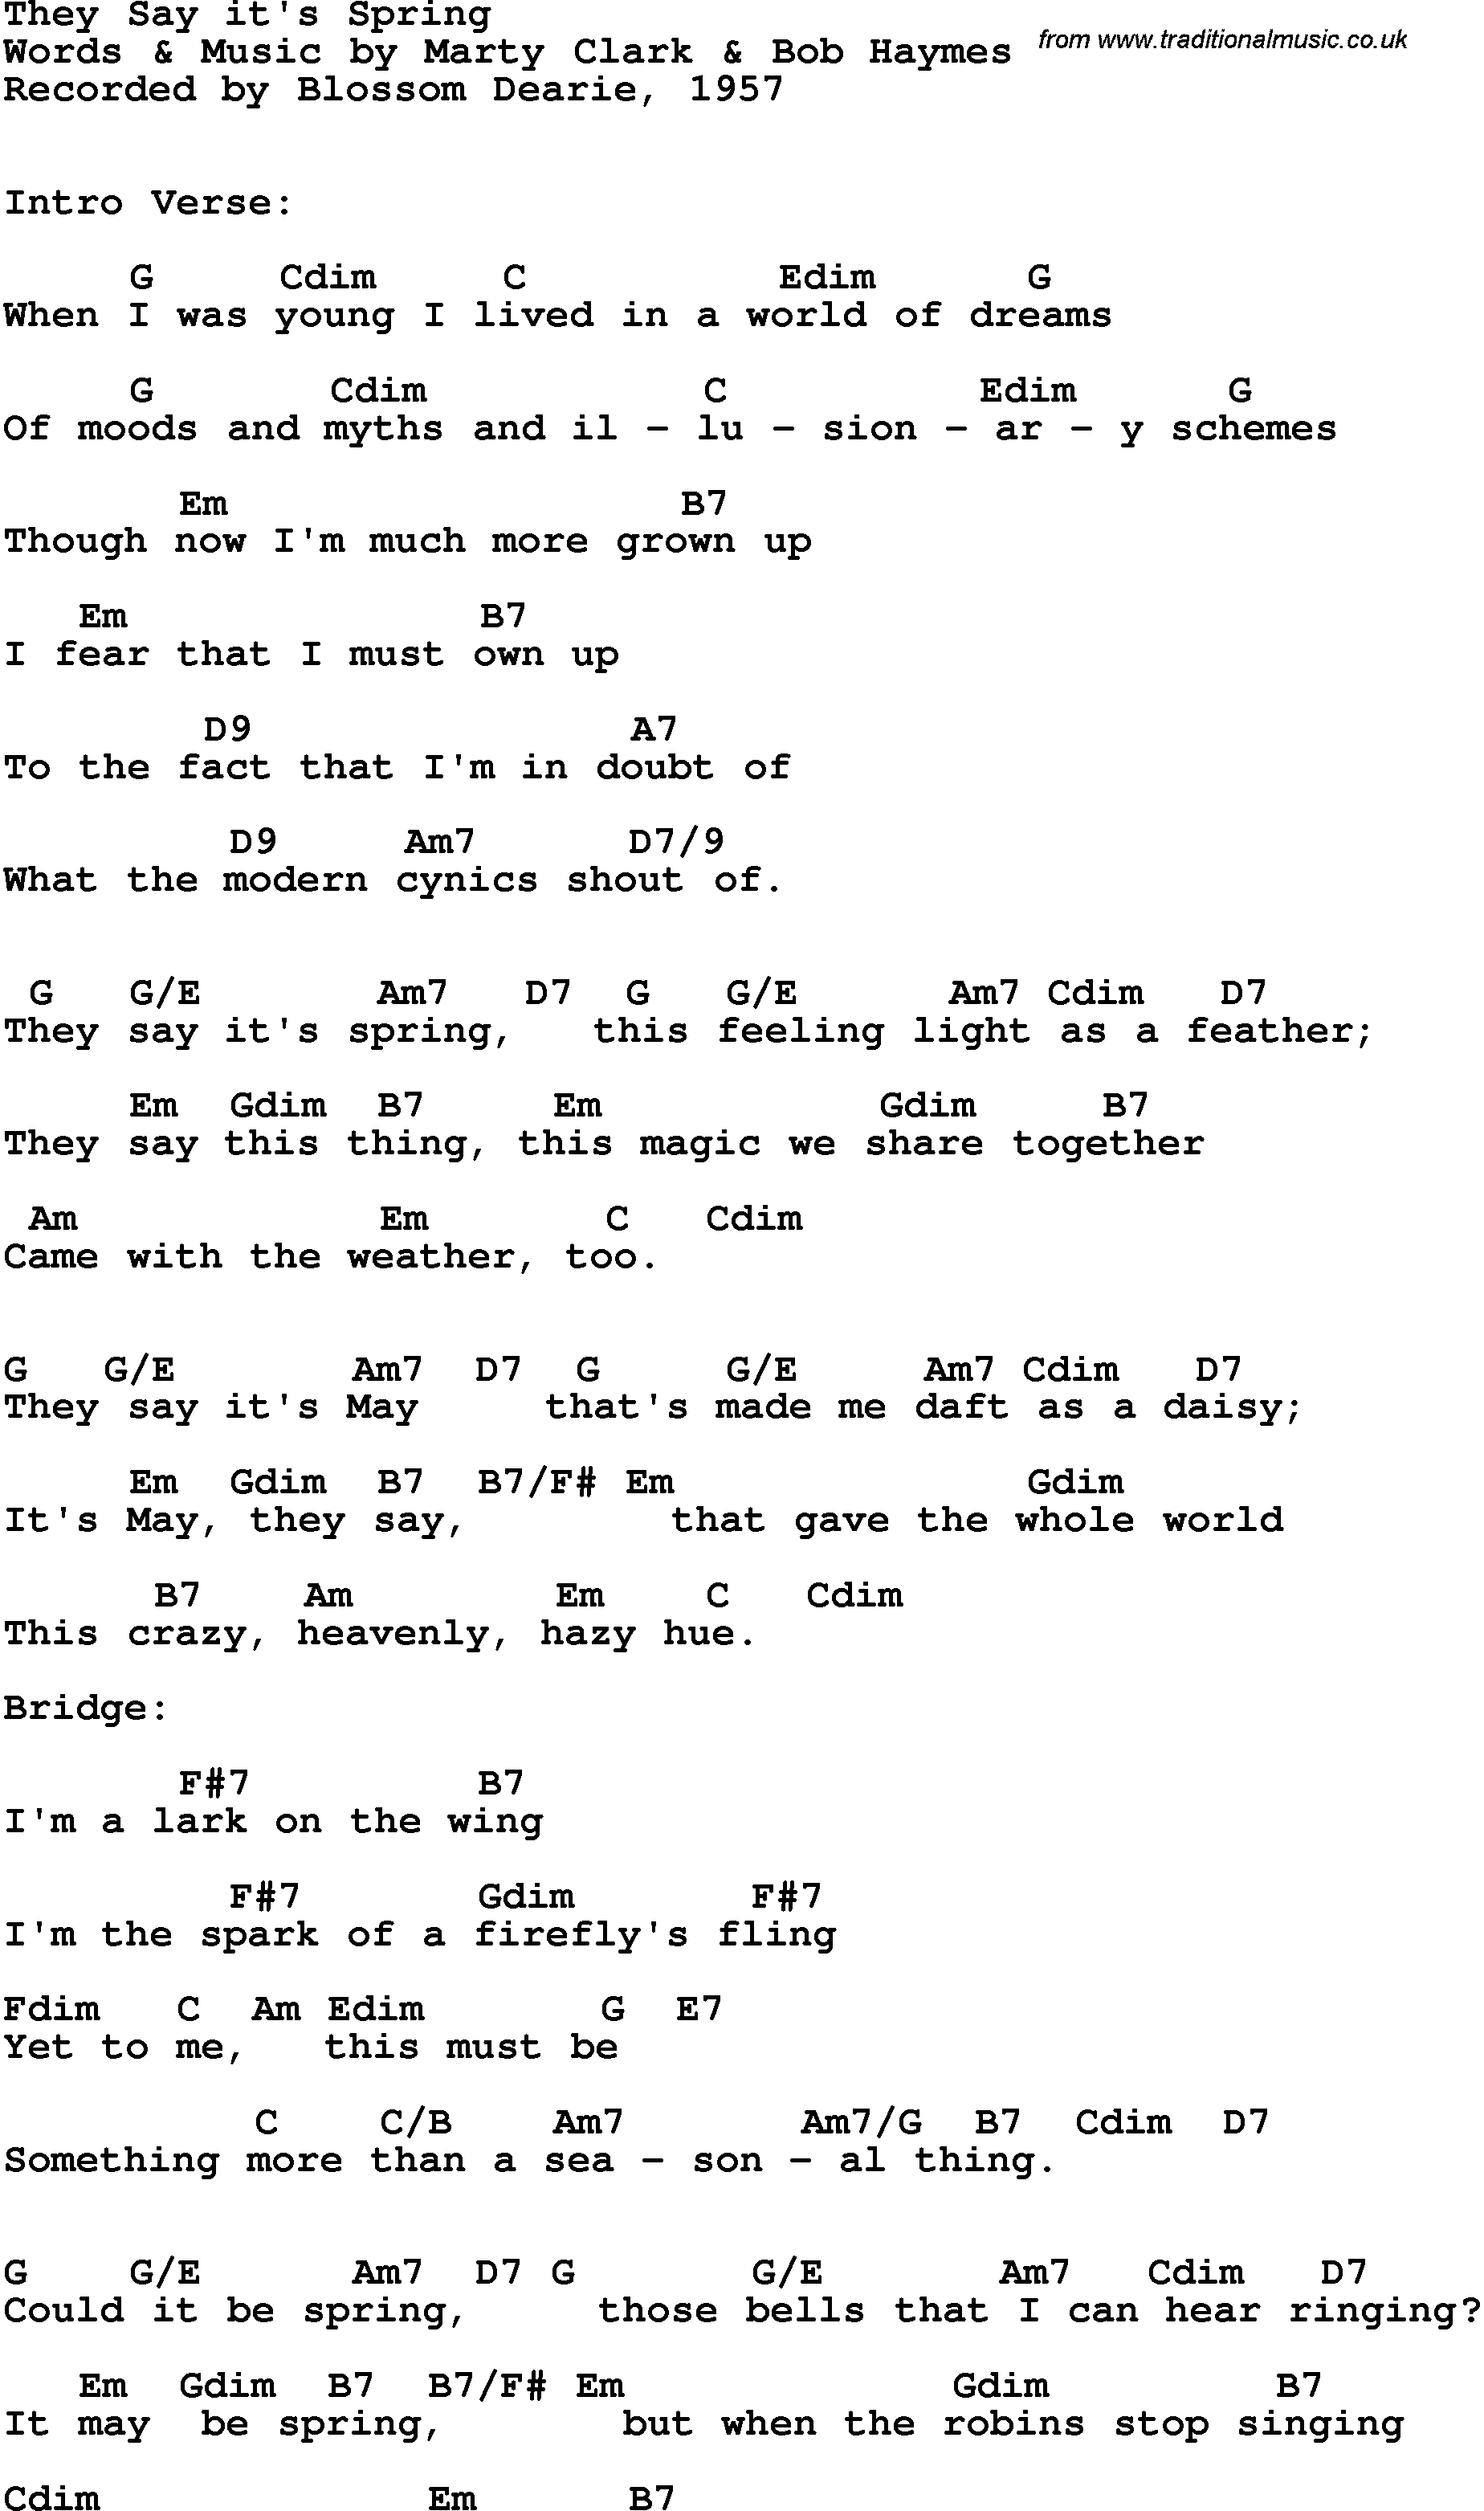 Song Lyrics with guitar chords for They Say It's Spring - Blossom Dearie, 1957